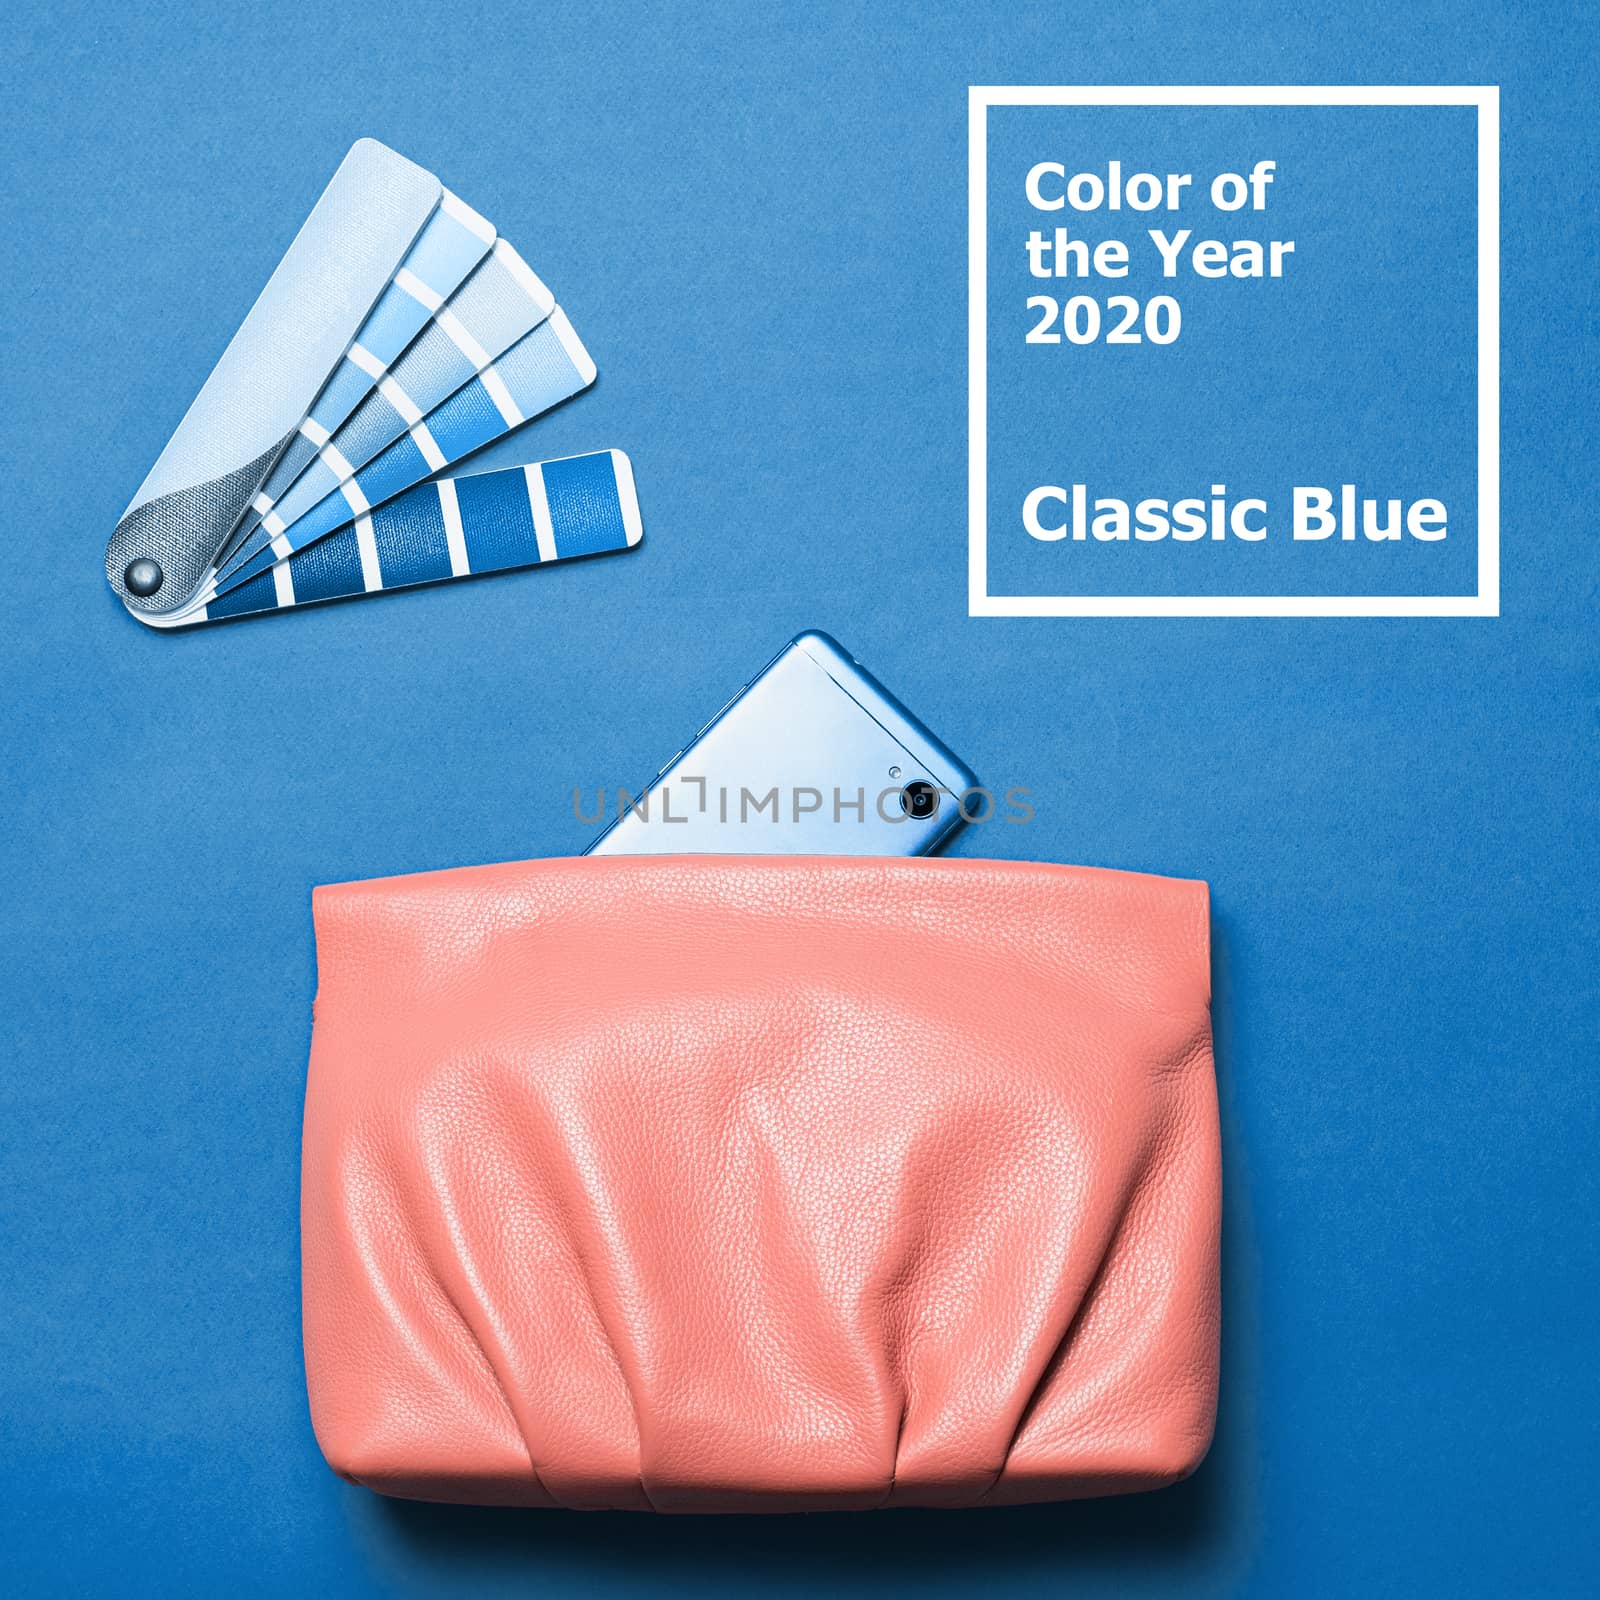 Pink coral female leather bag over classic blue 2020 color background. Color of year 2020 concept for fashion and clothing industry.